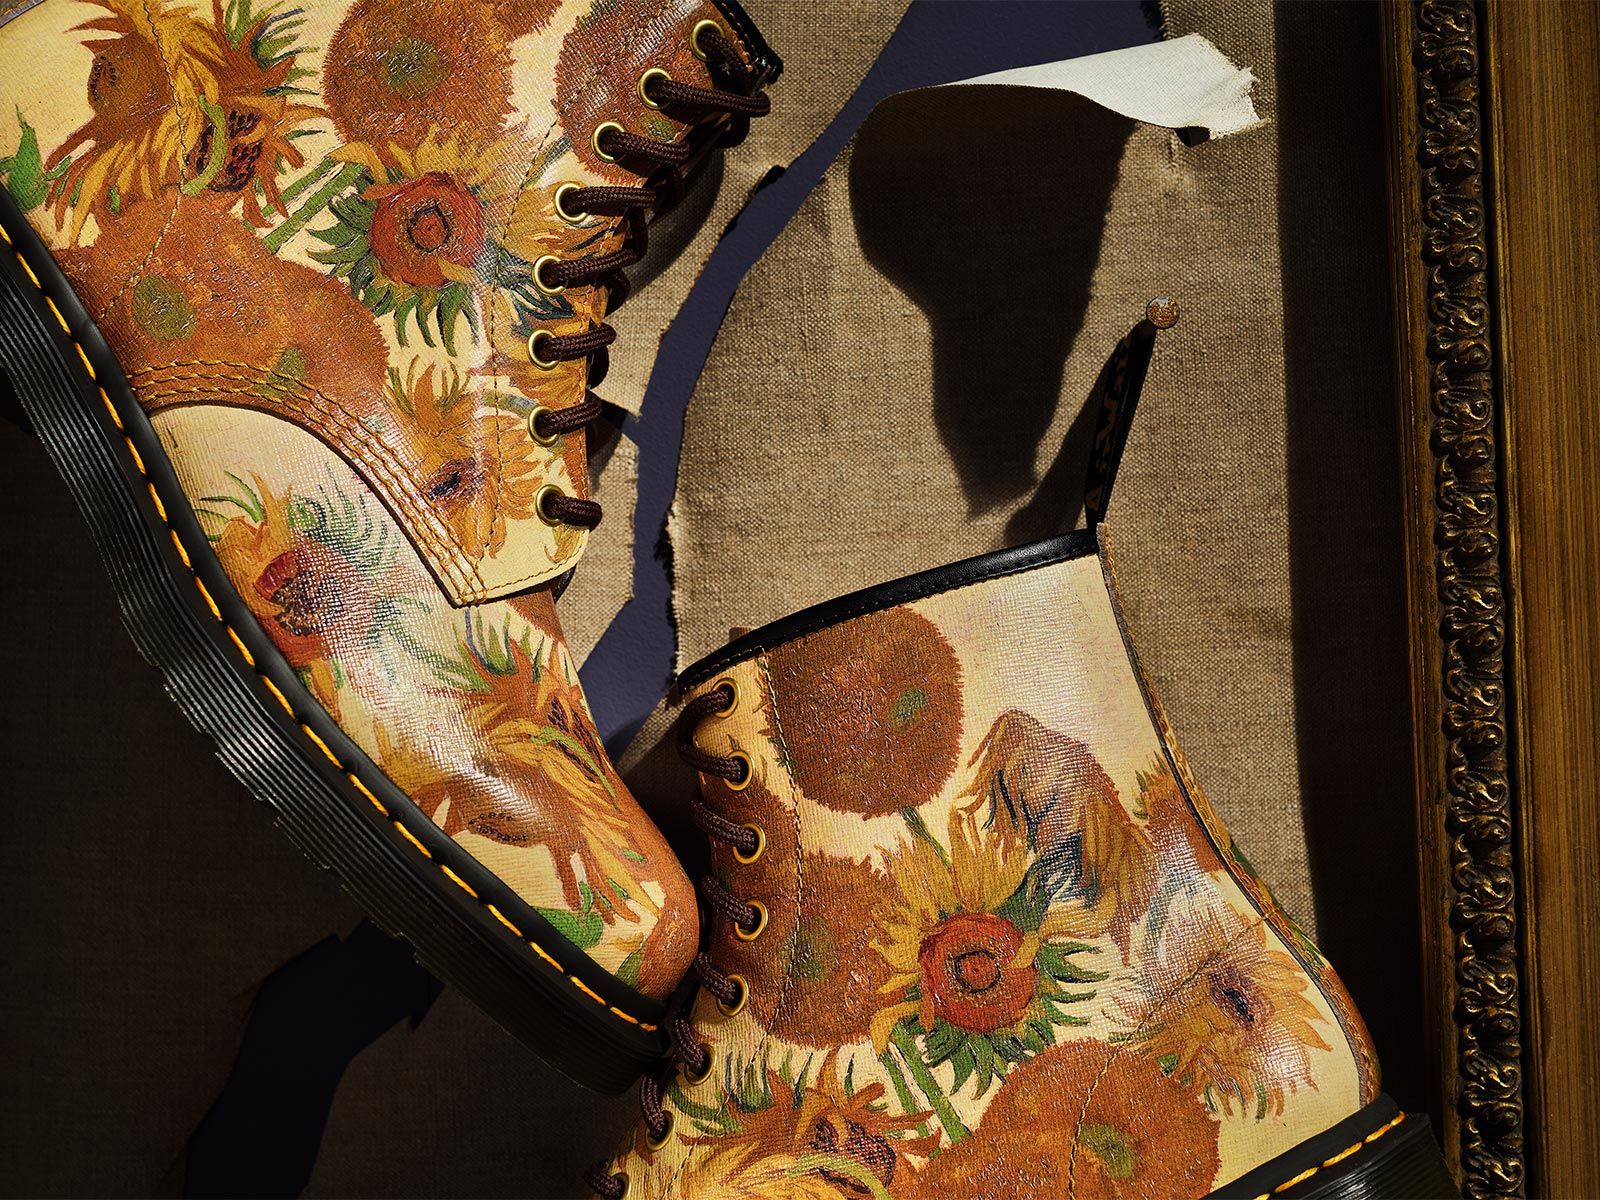 Dr. Martens and the National Gallery celebrate the legacy of unconventional artists